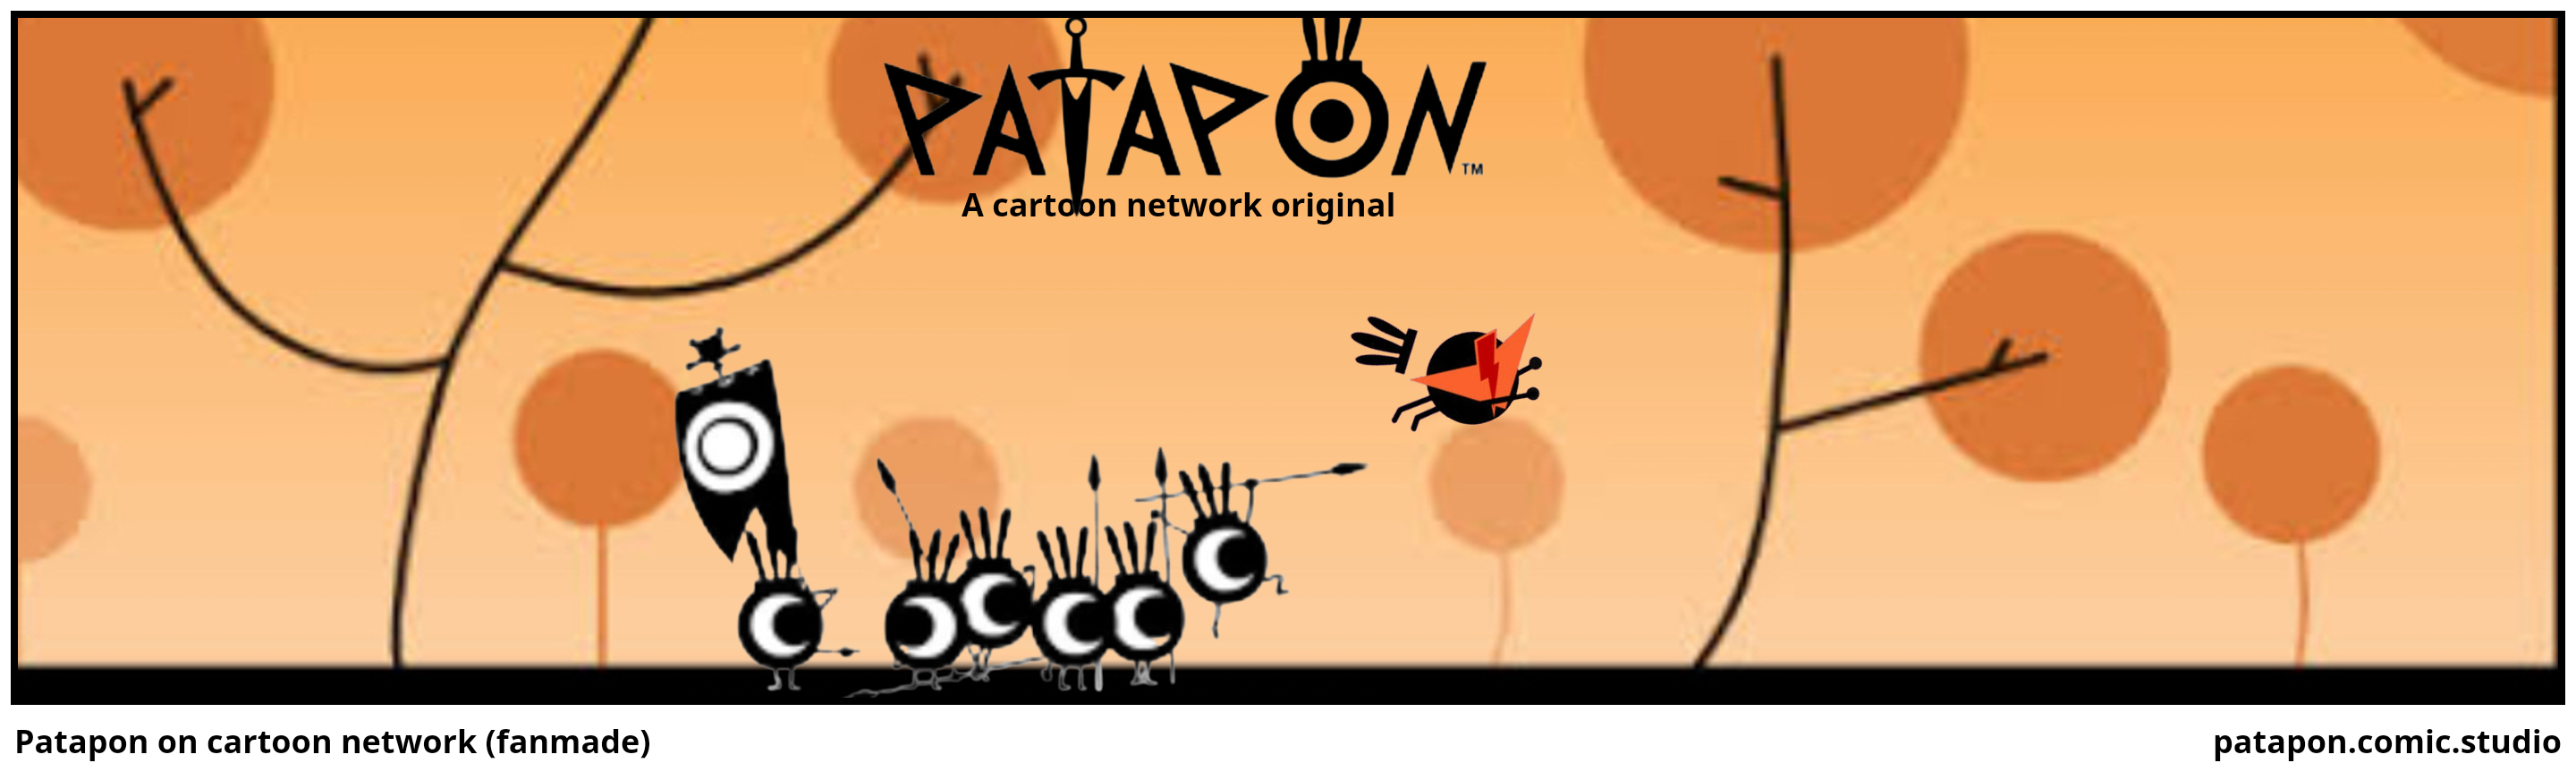 Patapon on cartoon network (fanmade)